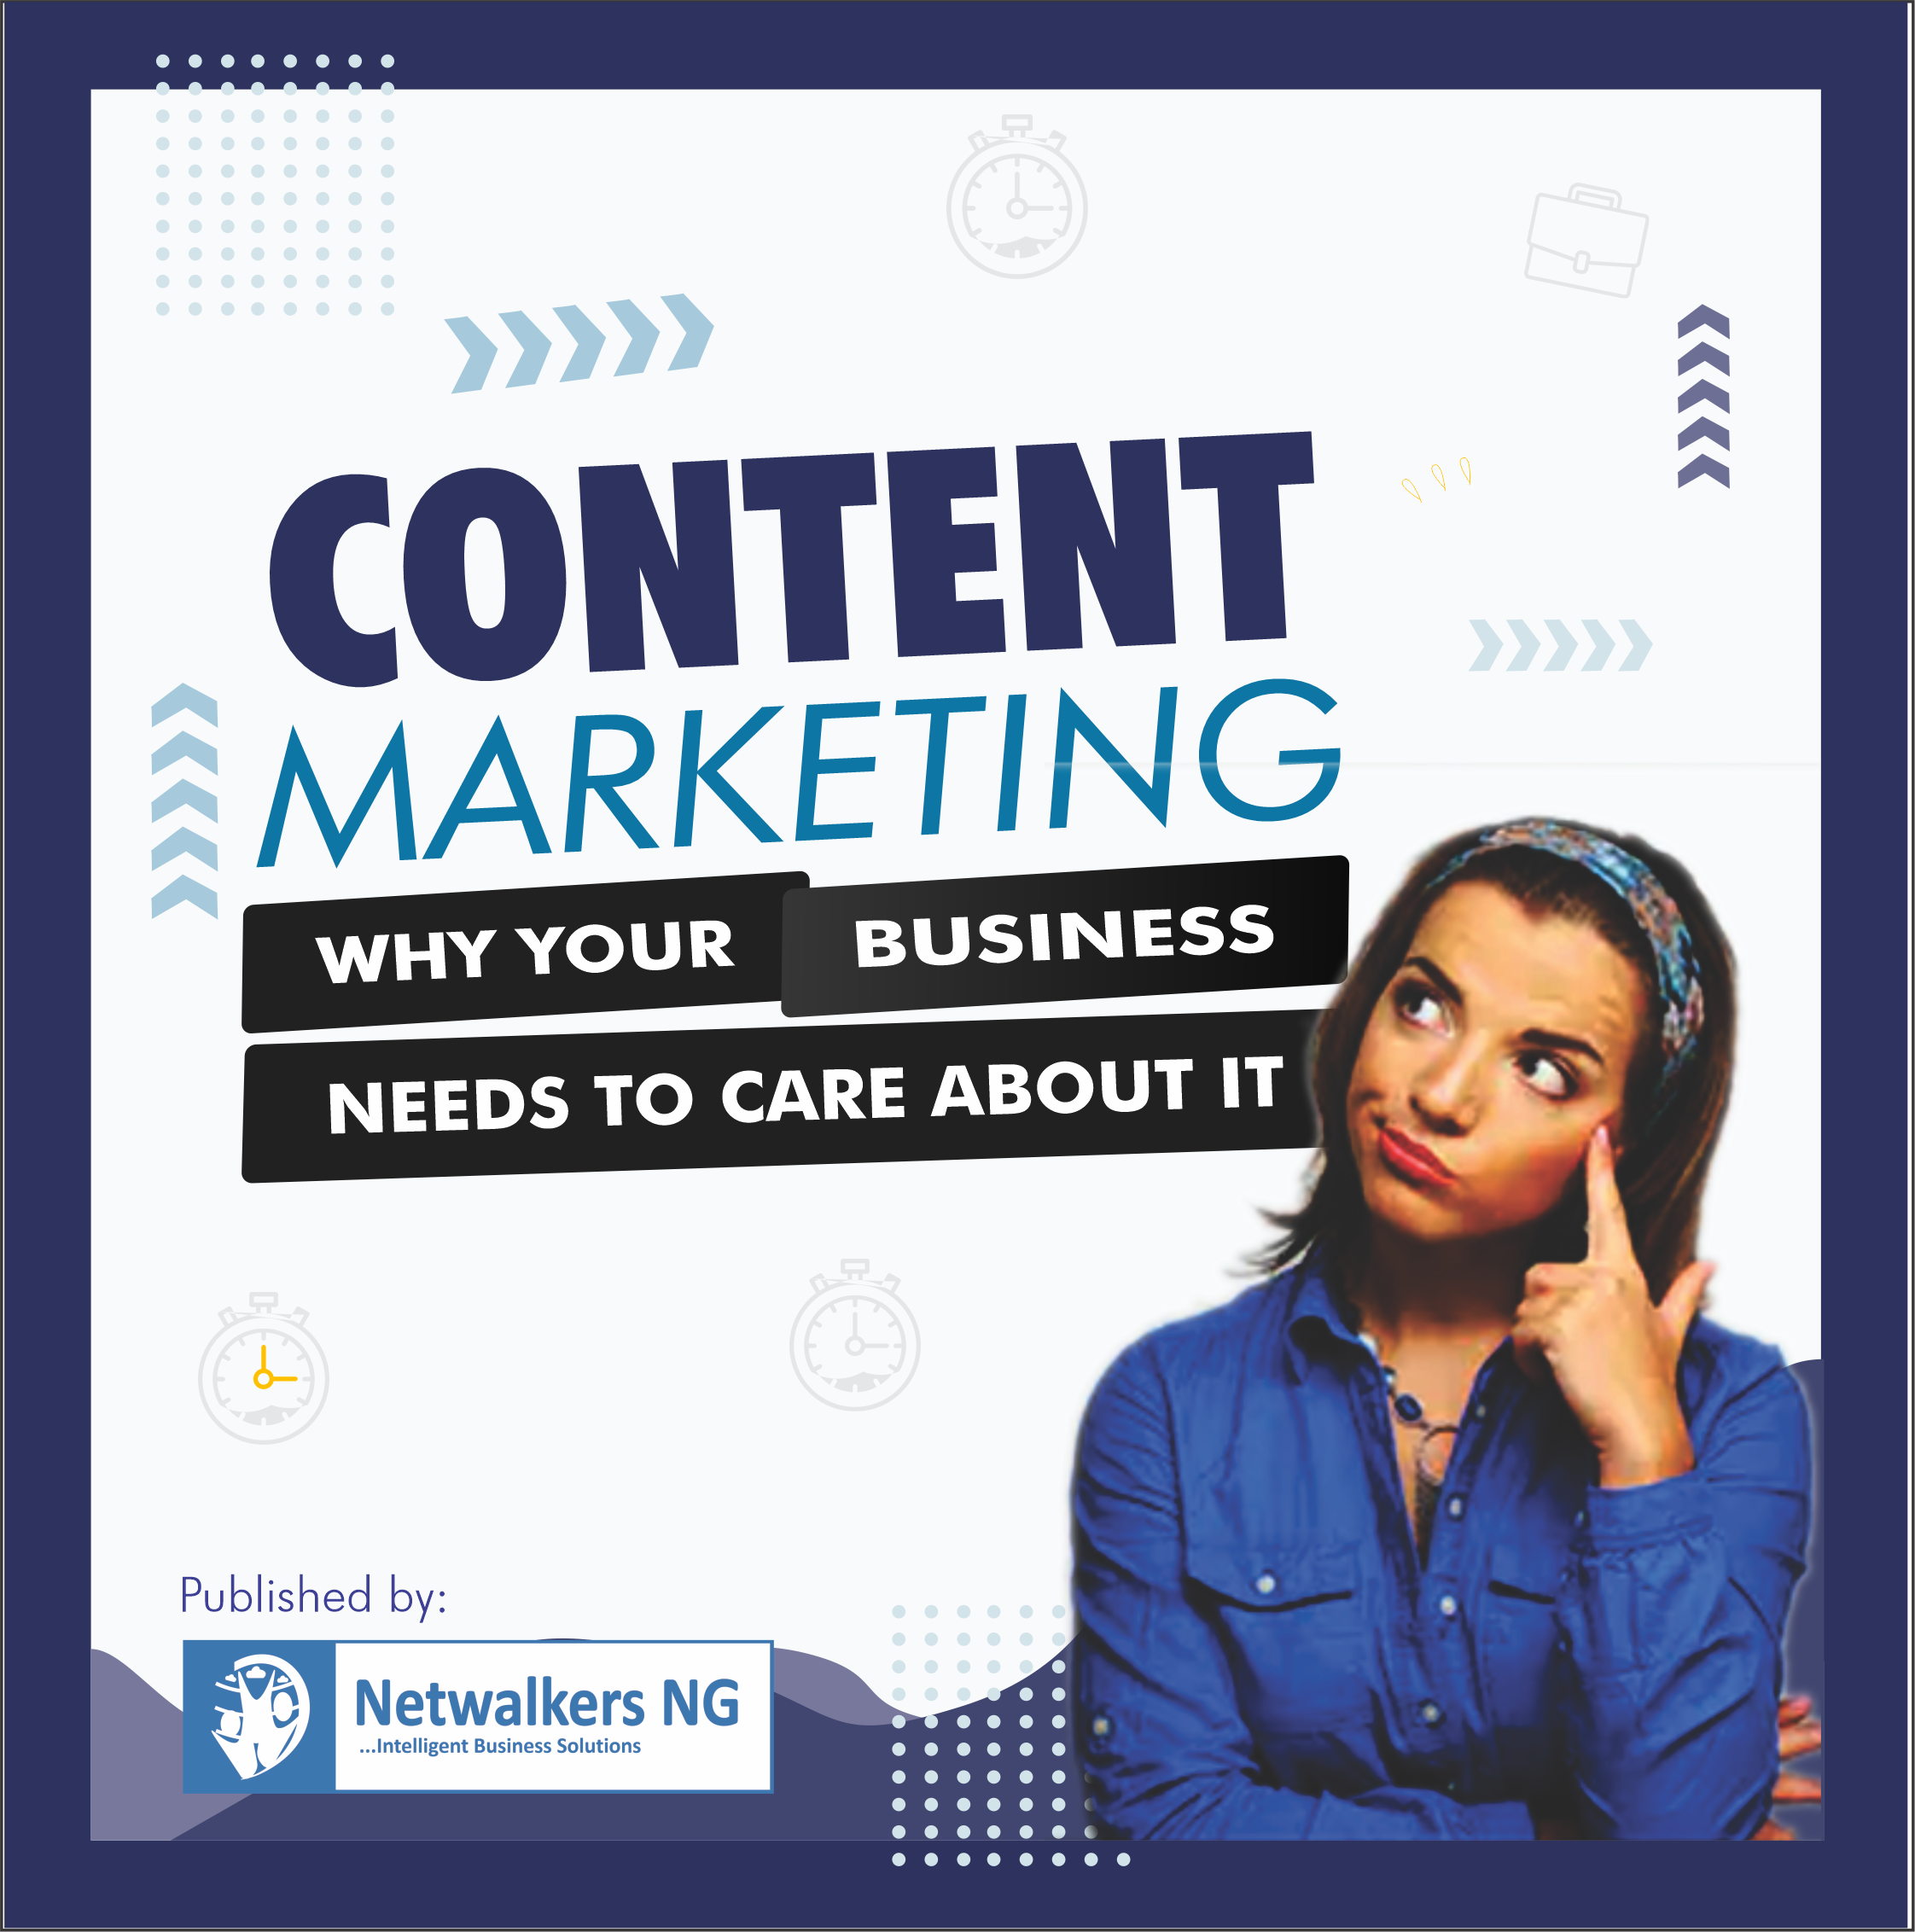 [BLOG POST] content marketing - why your business needs to care about it